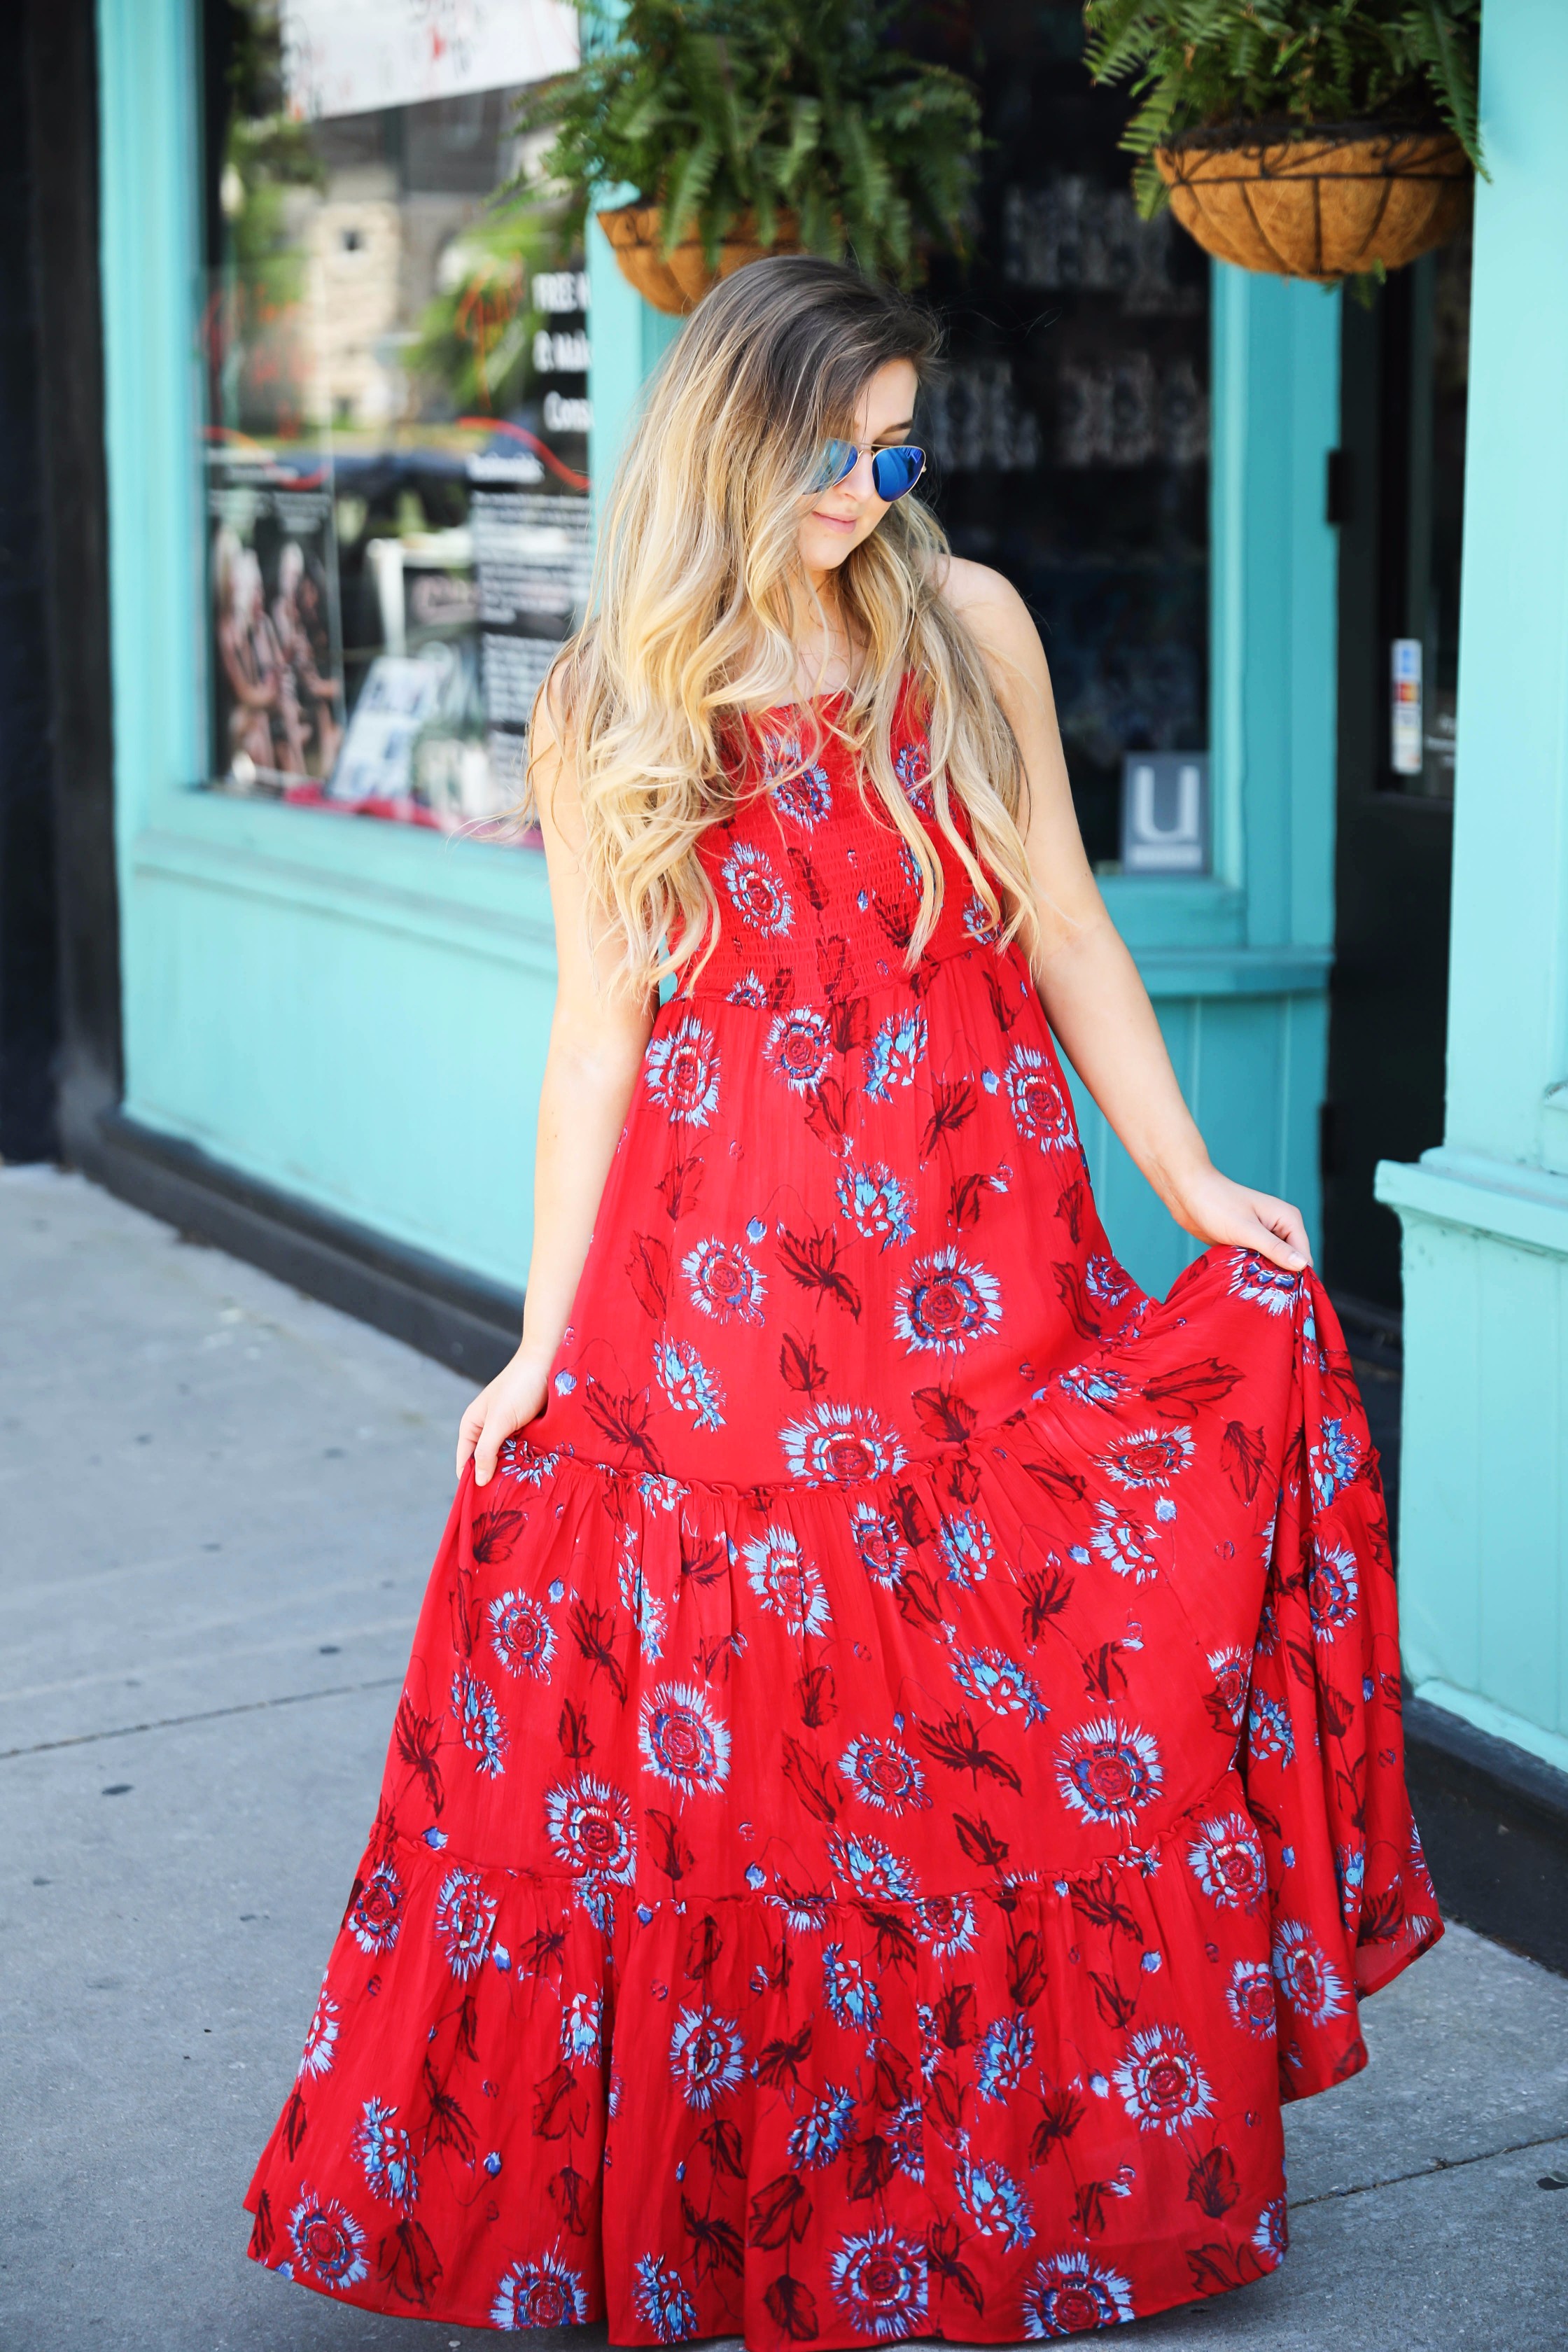 Free people red tie back maxi dress for summer and fourth of July outfit by lauren lindmark on daily dose of charm lauren lindmark